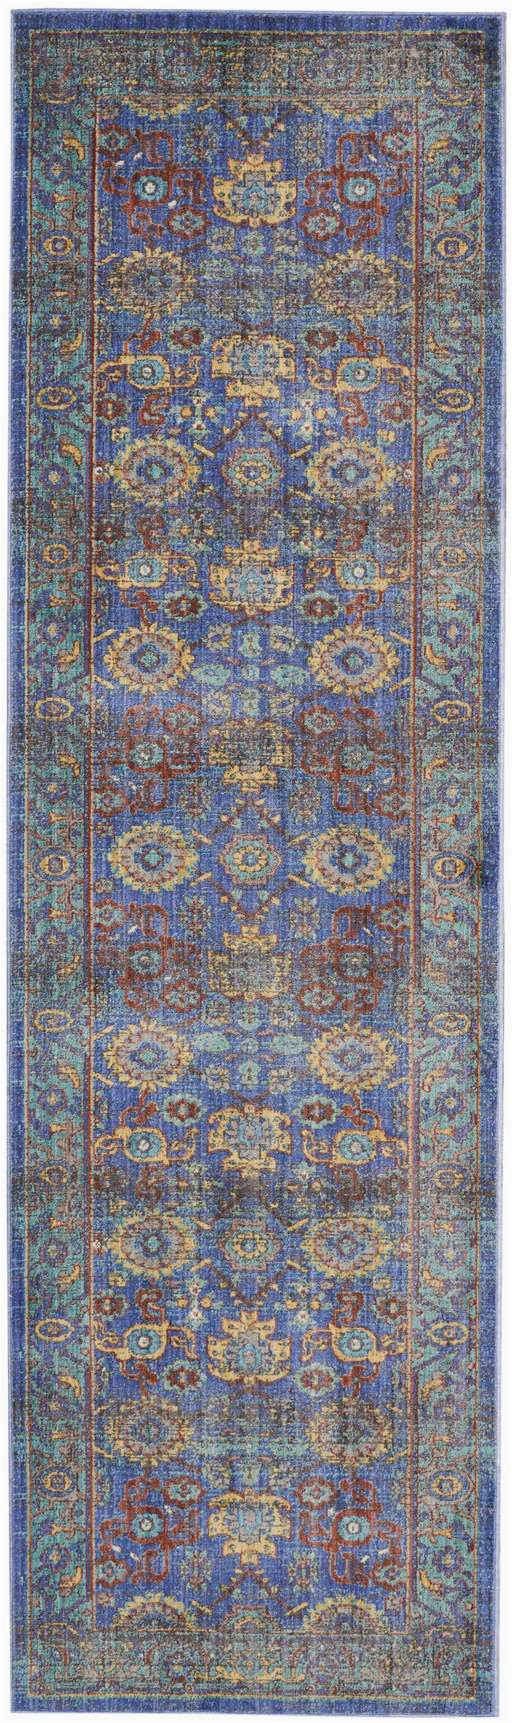 Blue area Rugs Near Me Rug Outlet Sacramento — Expo Furniture Gallery